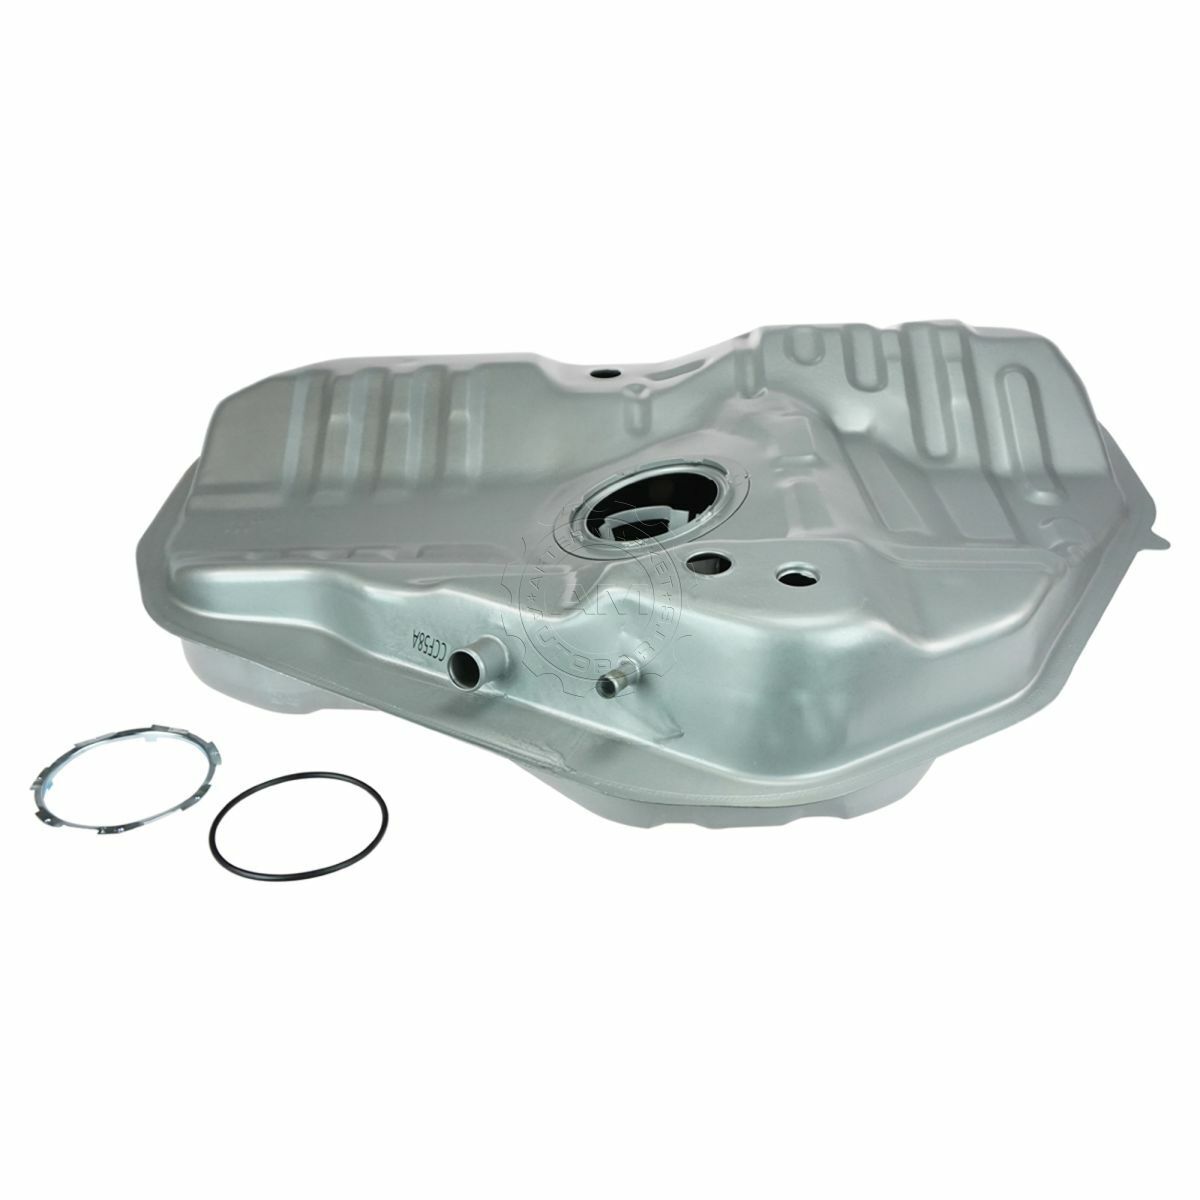 Fuel Gas Tank for Ford Escort ZX2 Mercury Tracer New